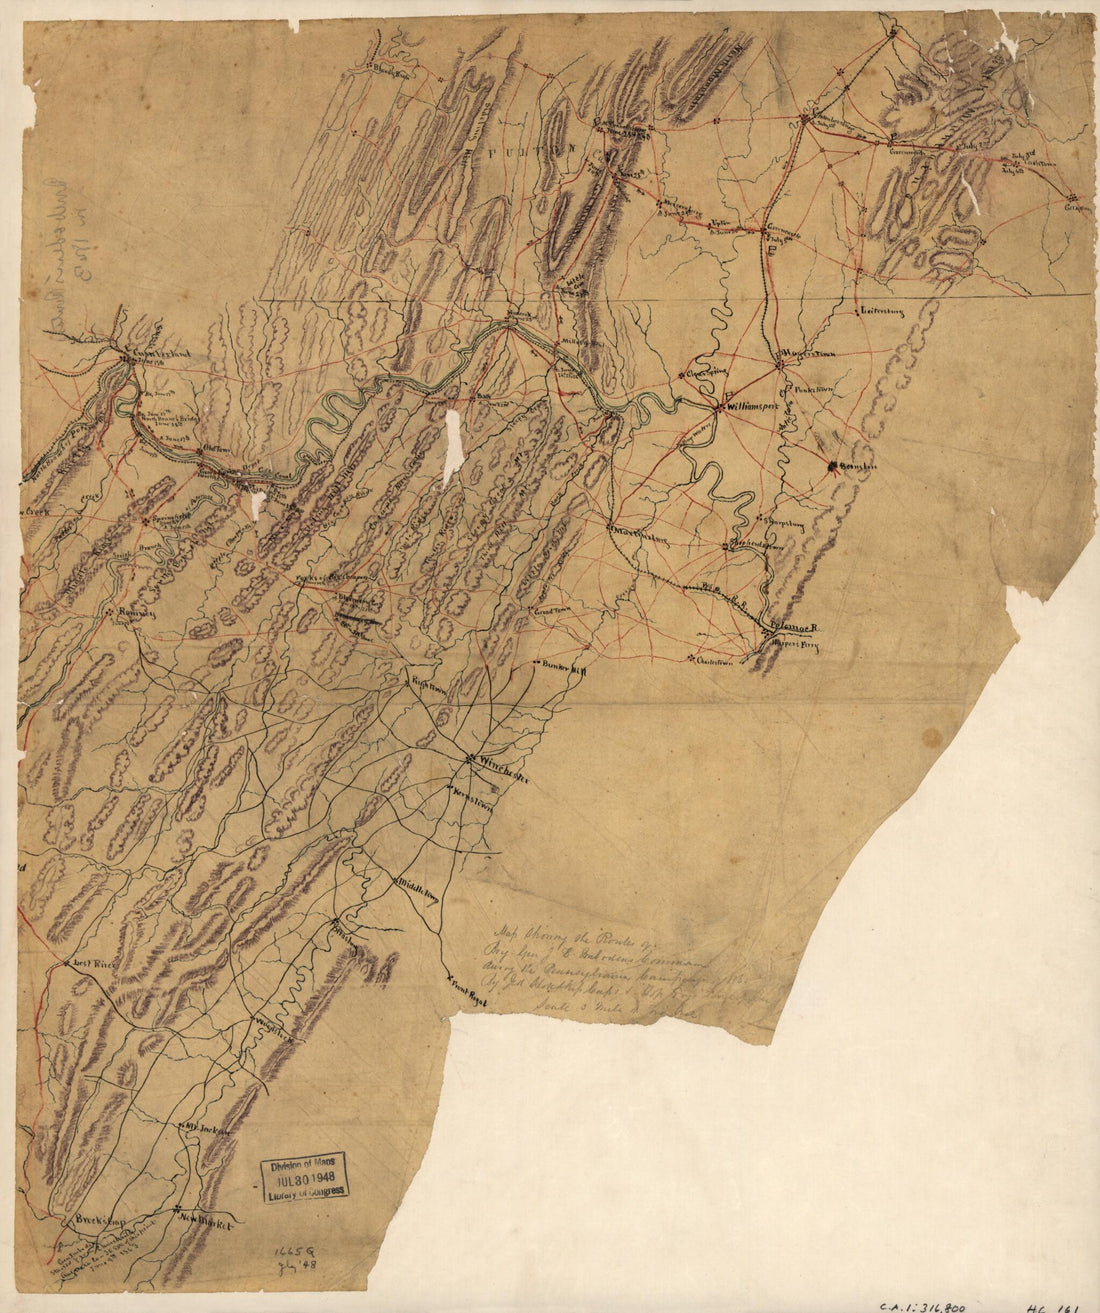 This old map of Map Showing the Routes of Brig. Gen. J.B. i.e., J.D. Imboden&